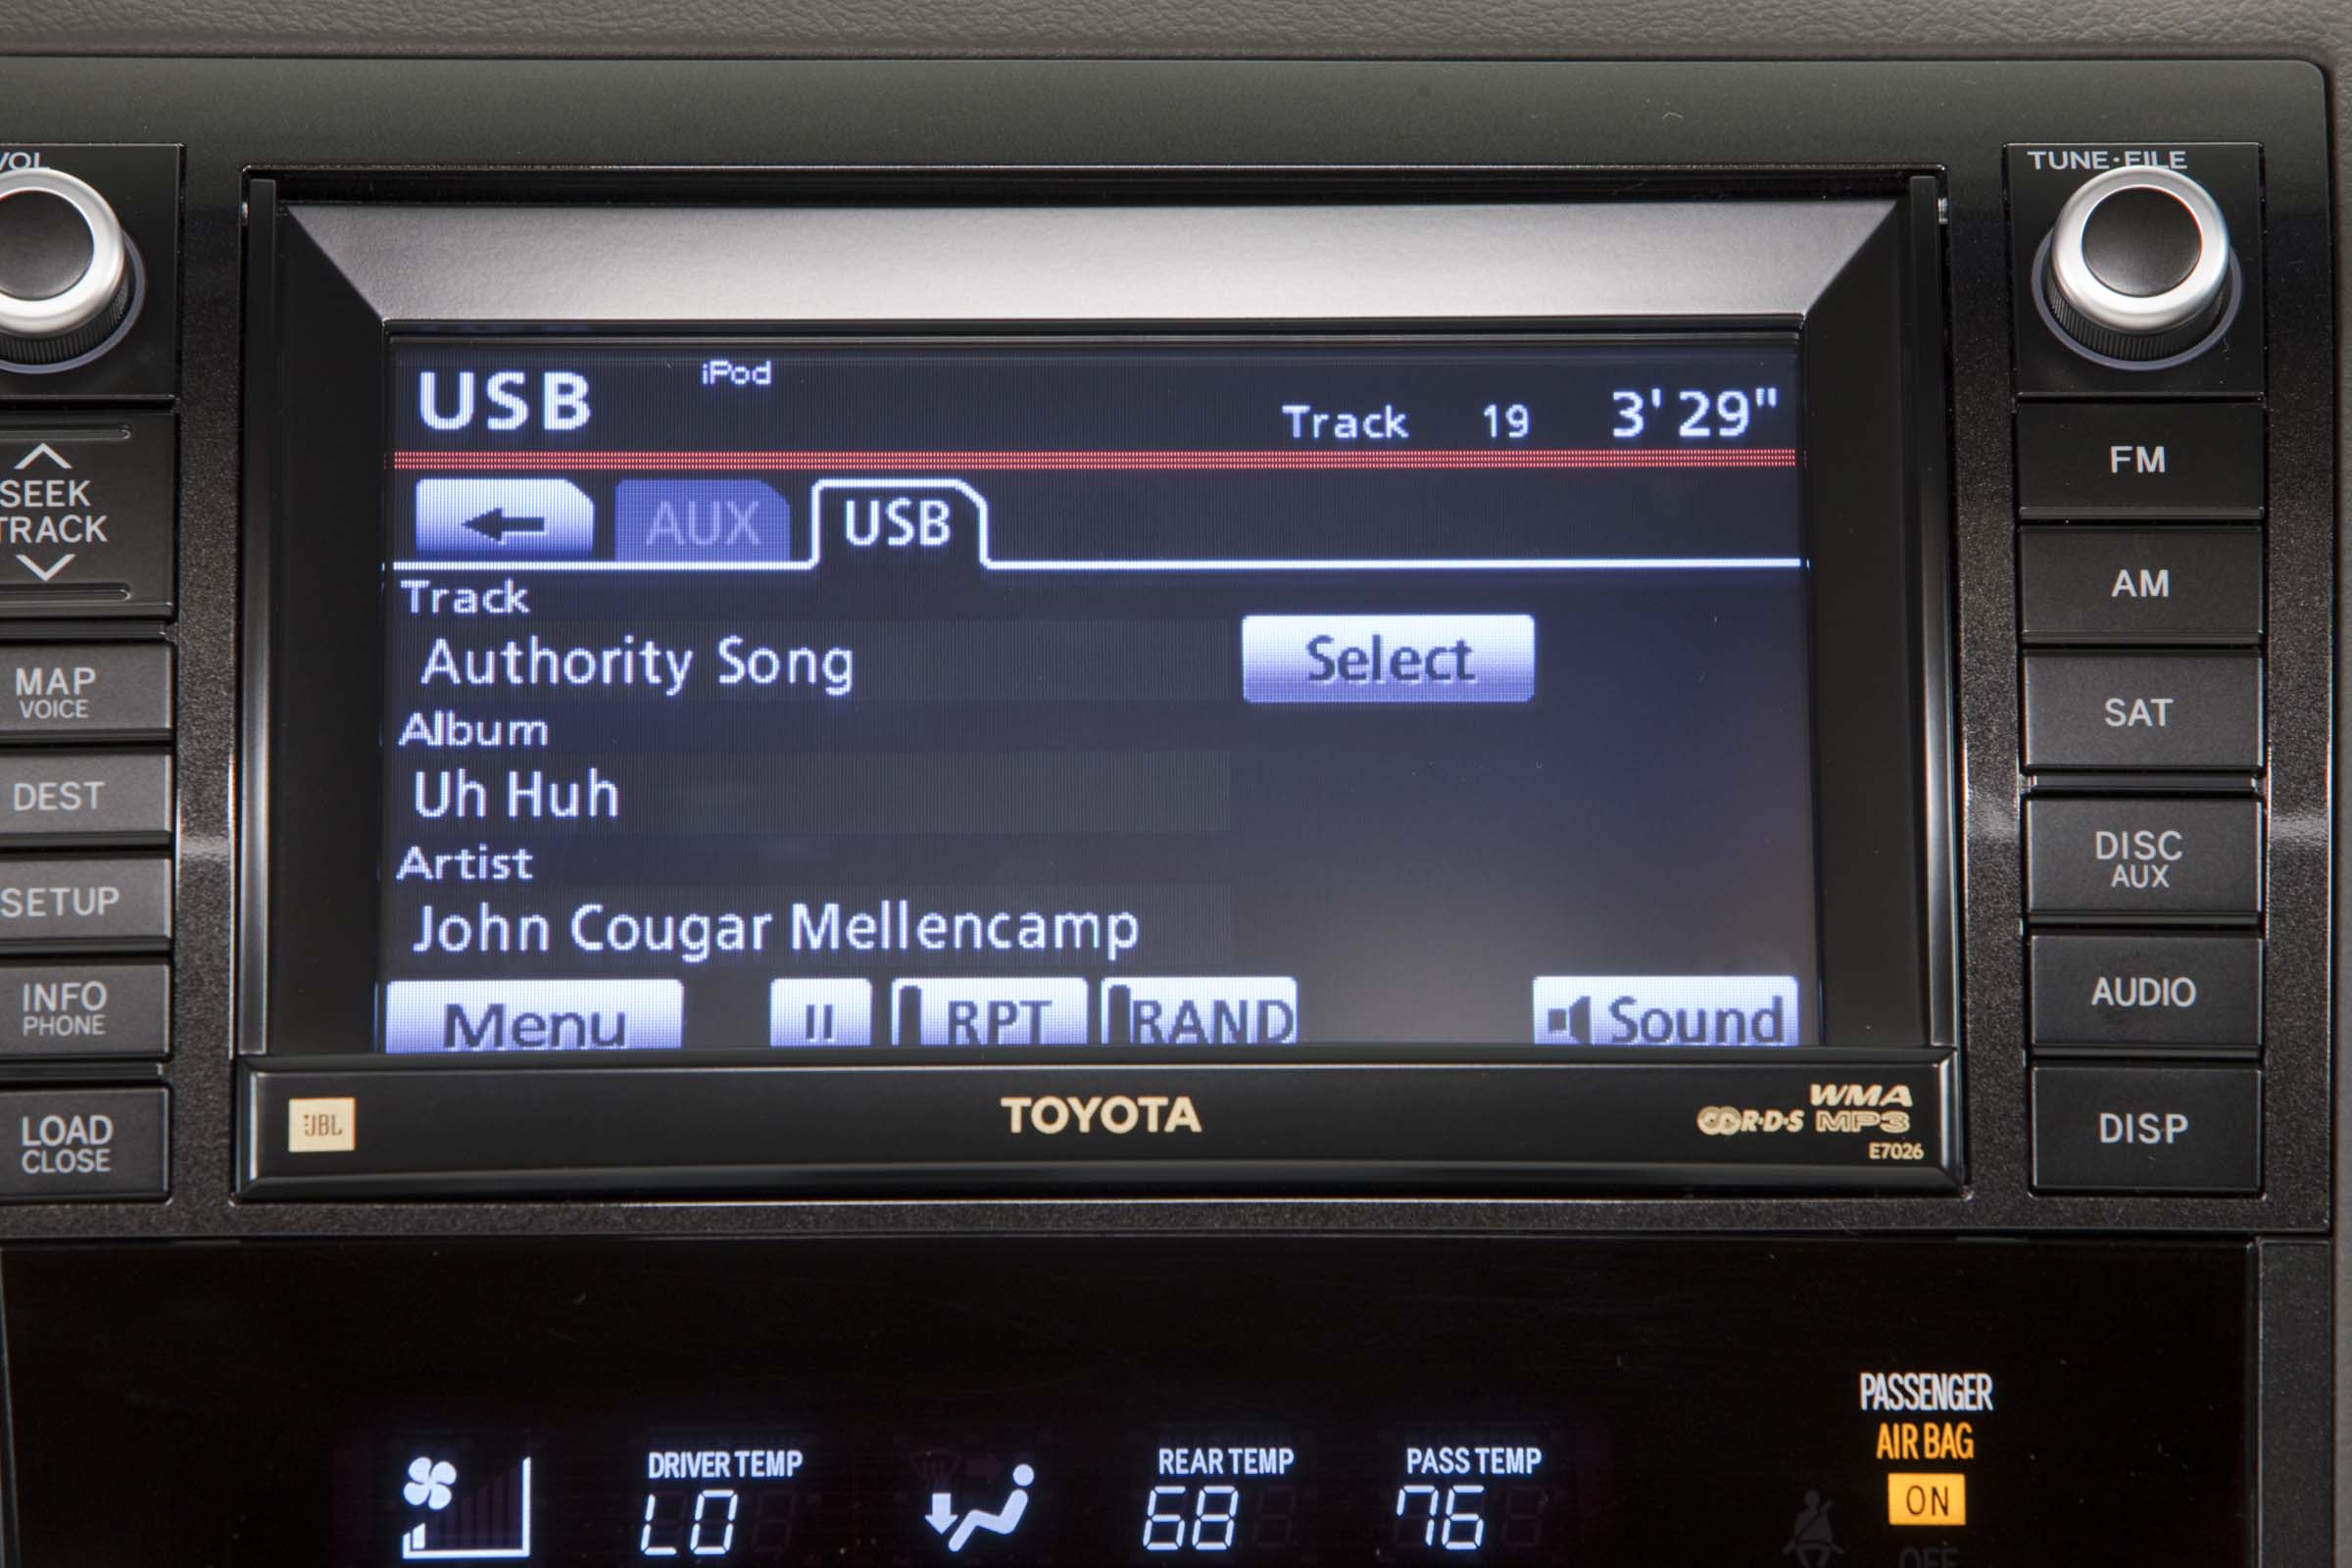 2015 Toyota Sequoia USB Touch Screen